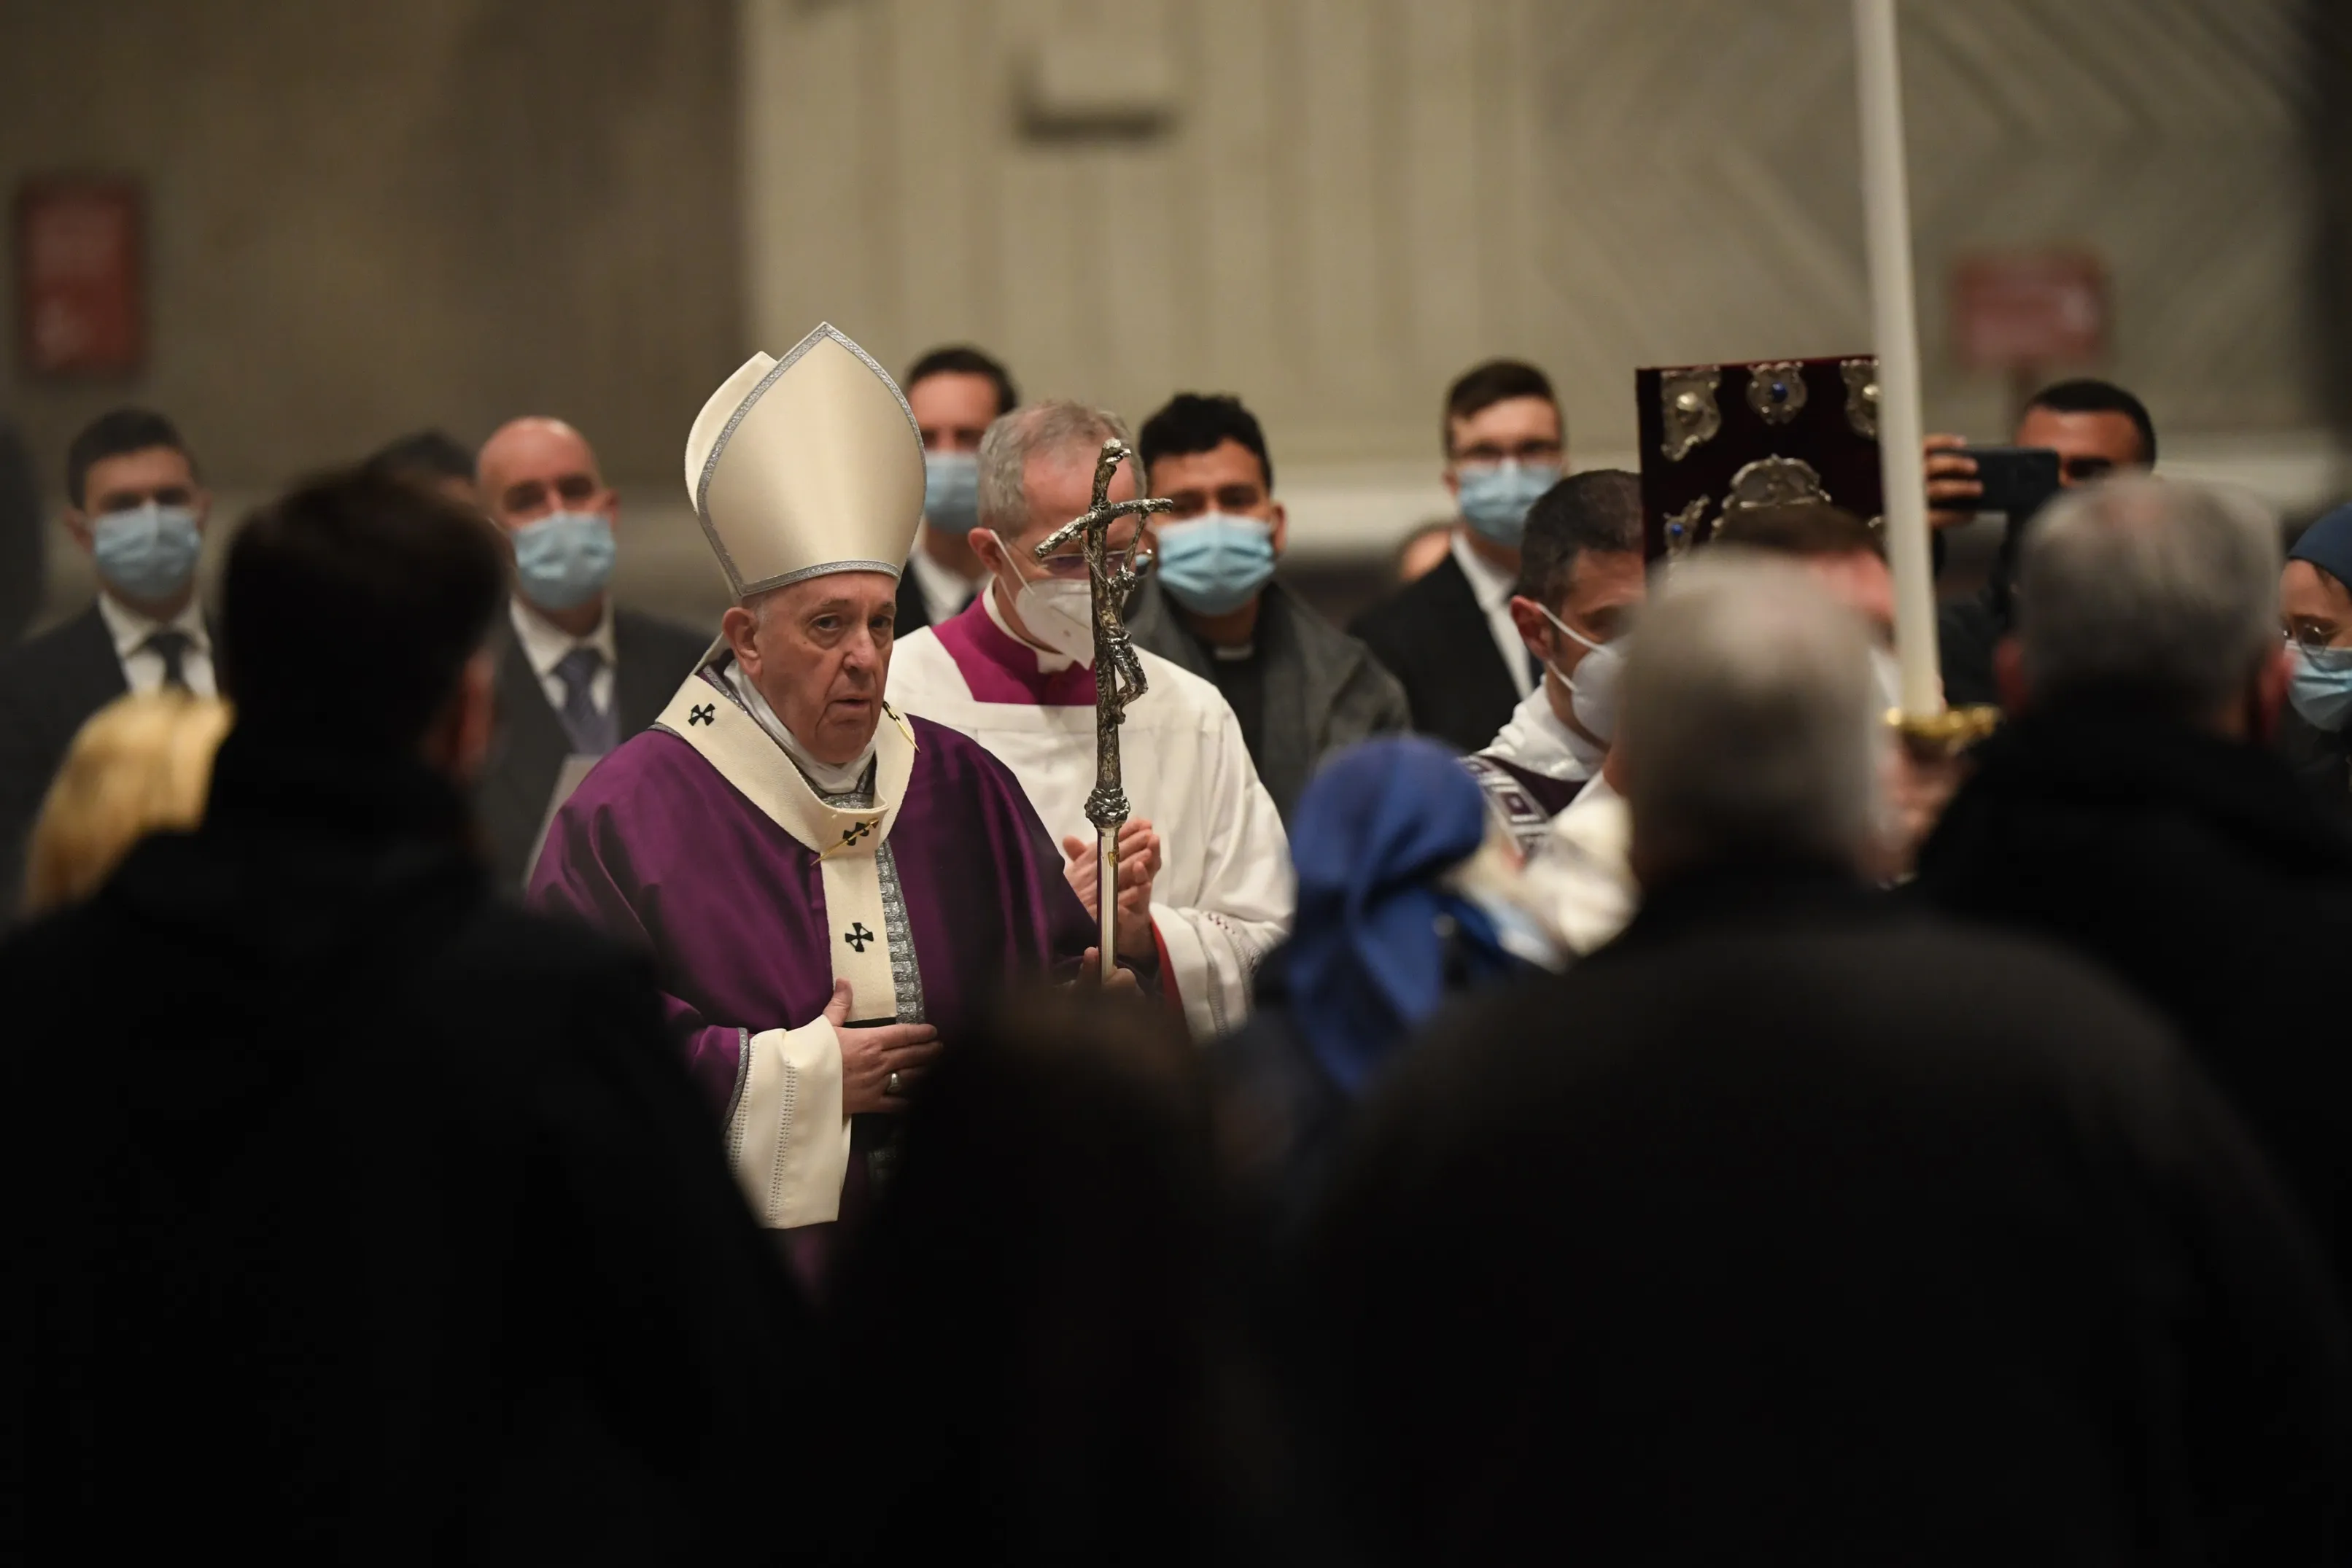 Bishop-elect Guido Marini walks beside Pope Francis on Ash Wednesday 2021 in St. Peter's Basilica. Vatican Media